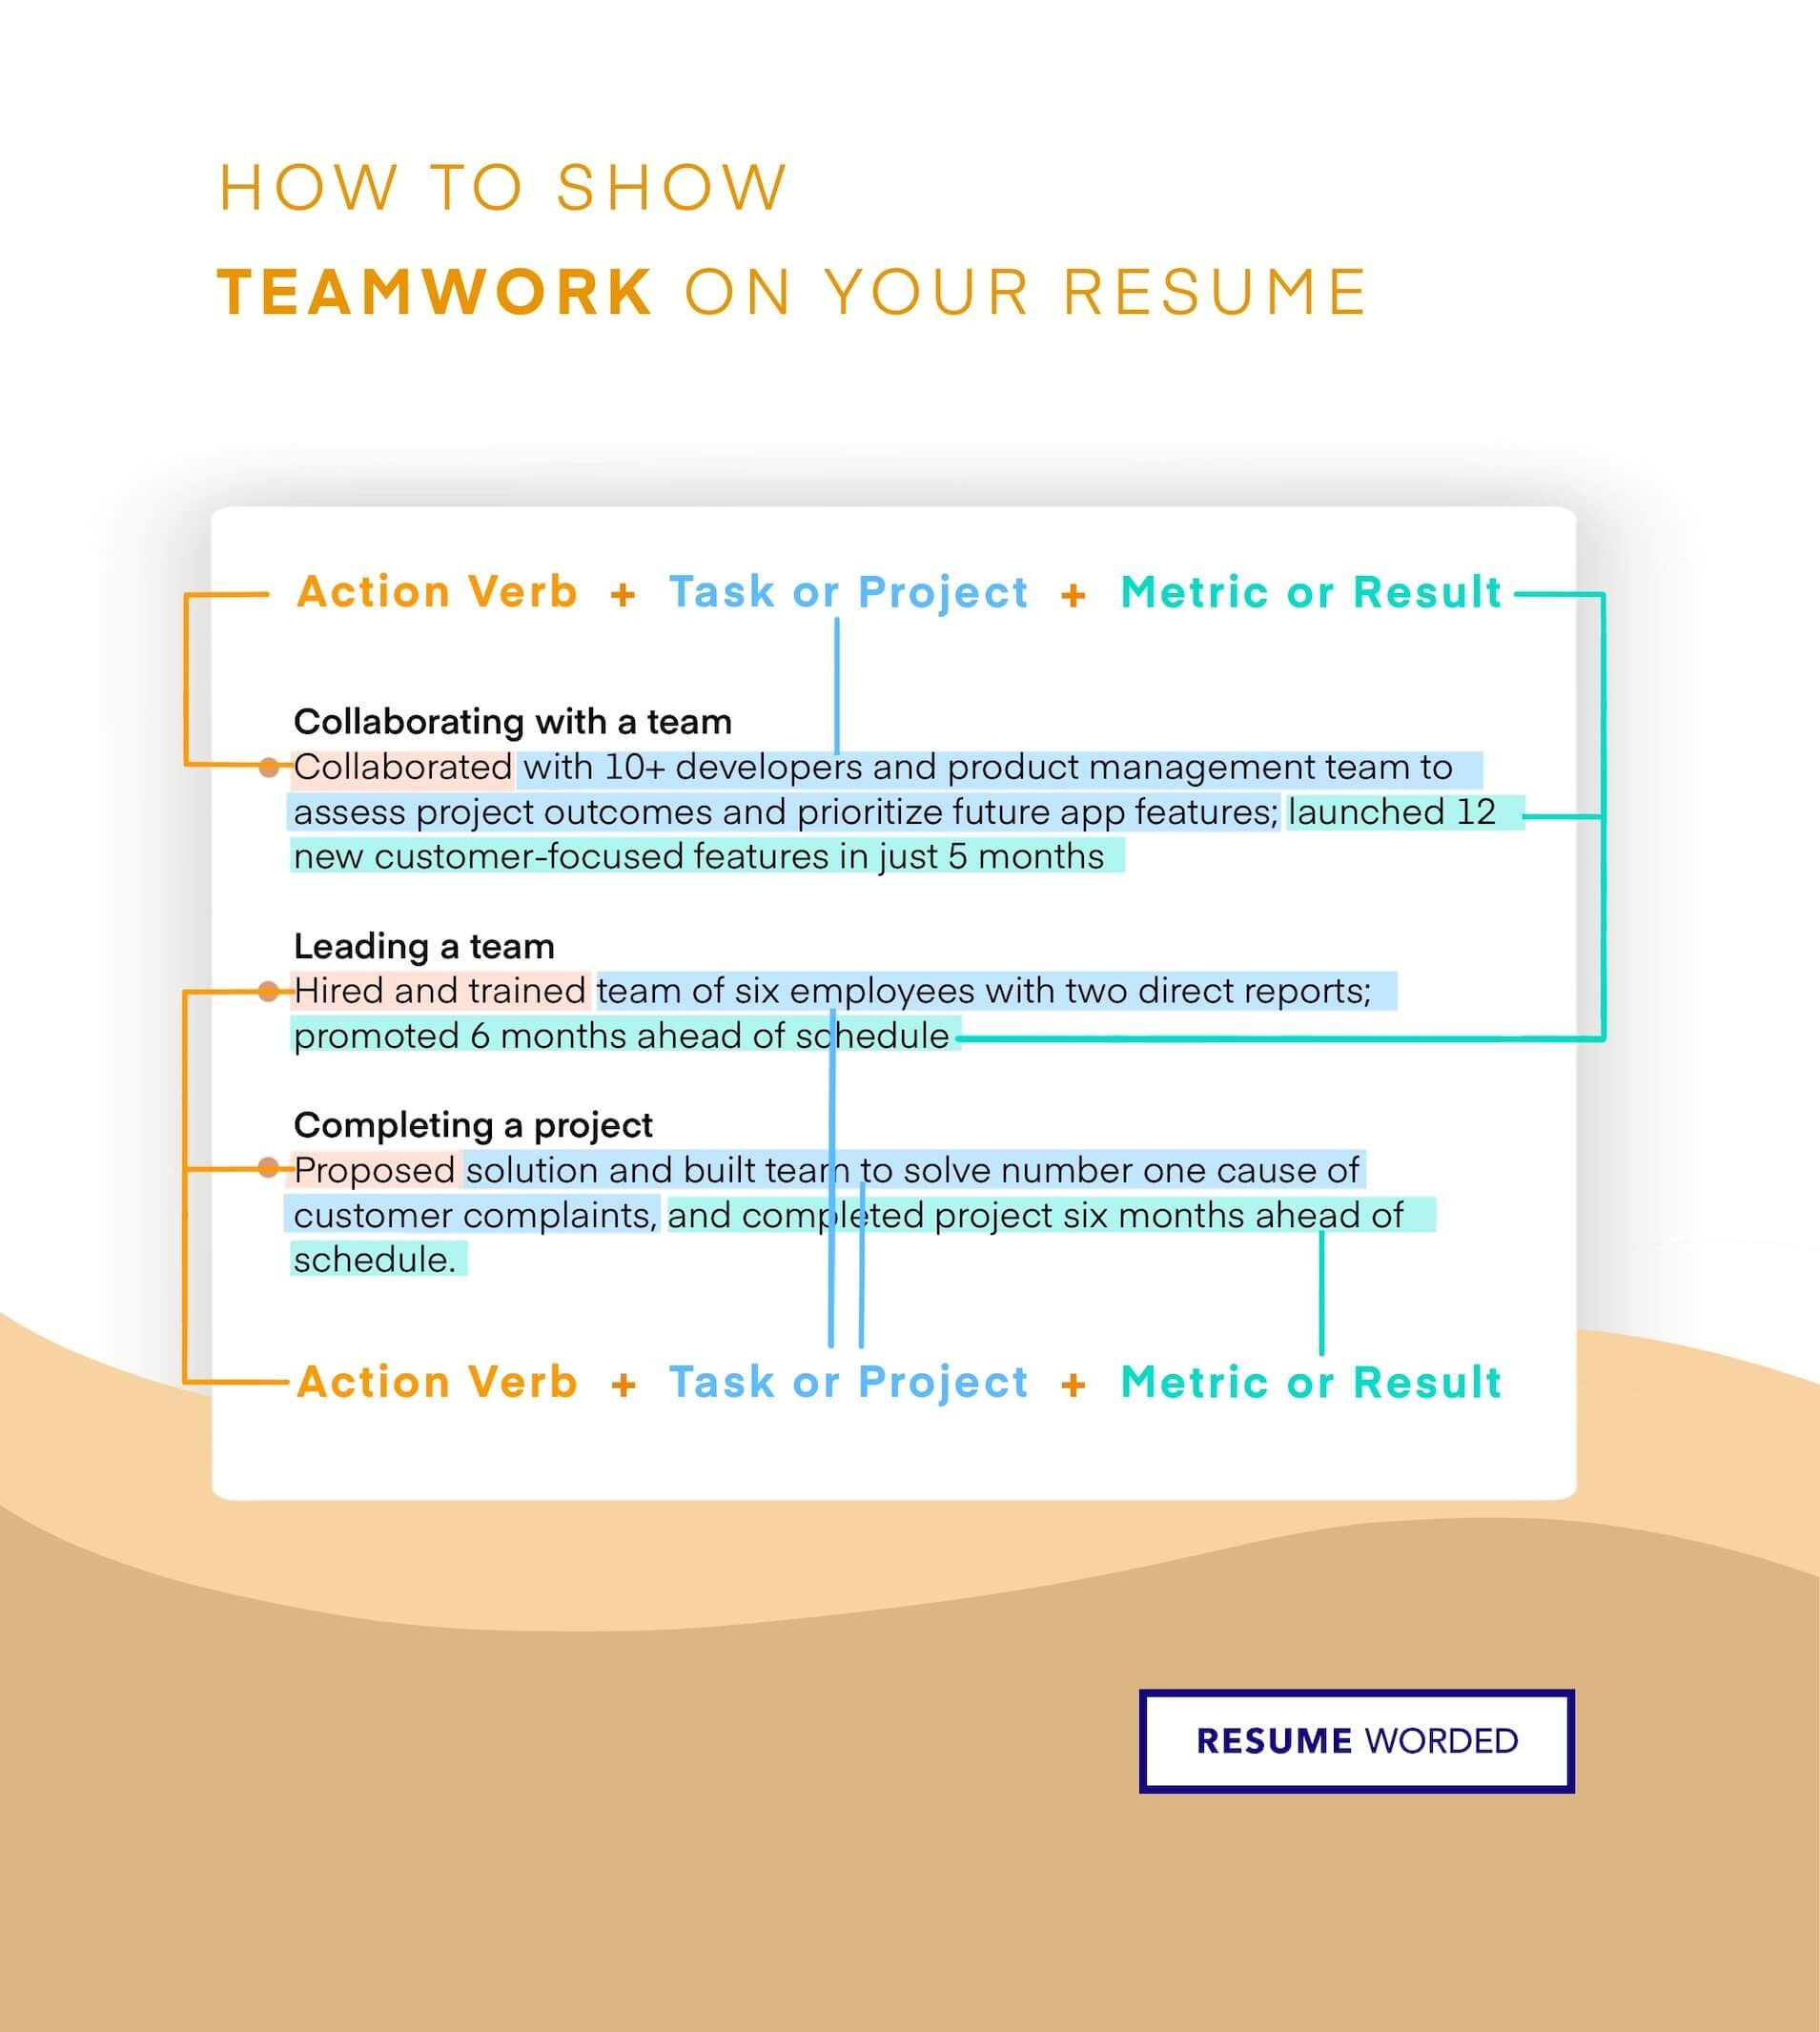 Mention your abilities to cooperate with teams. - Help Desk Technician Resume